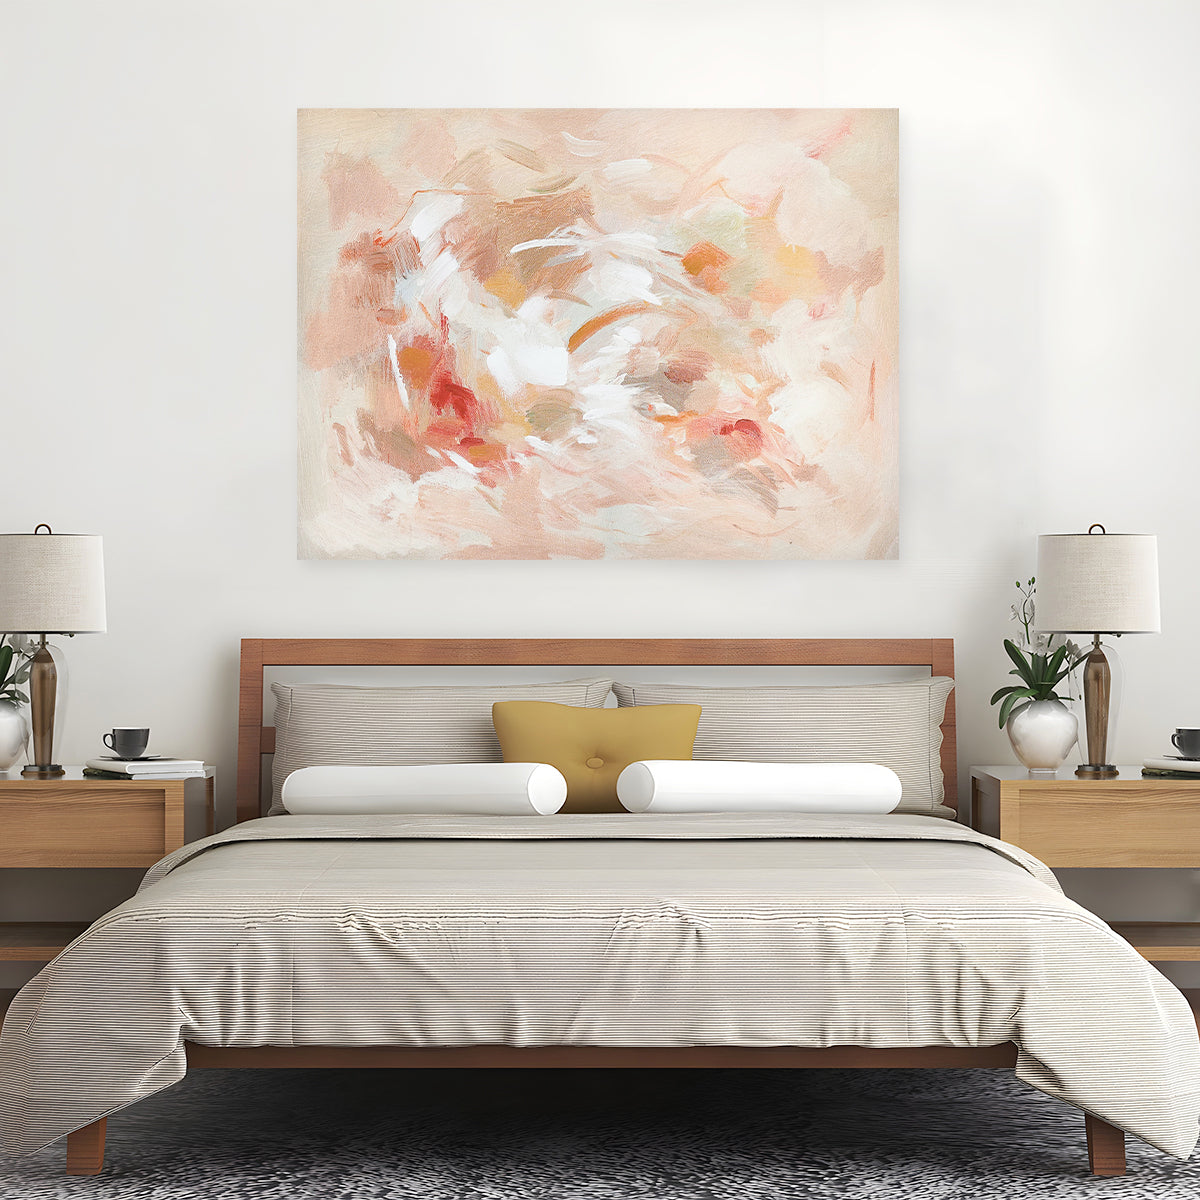 Pink Abstract textured wall art affordable oil painting unframed in bedroom landscape